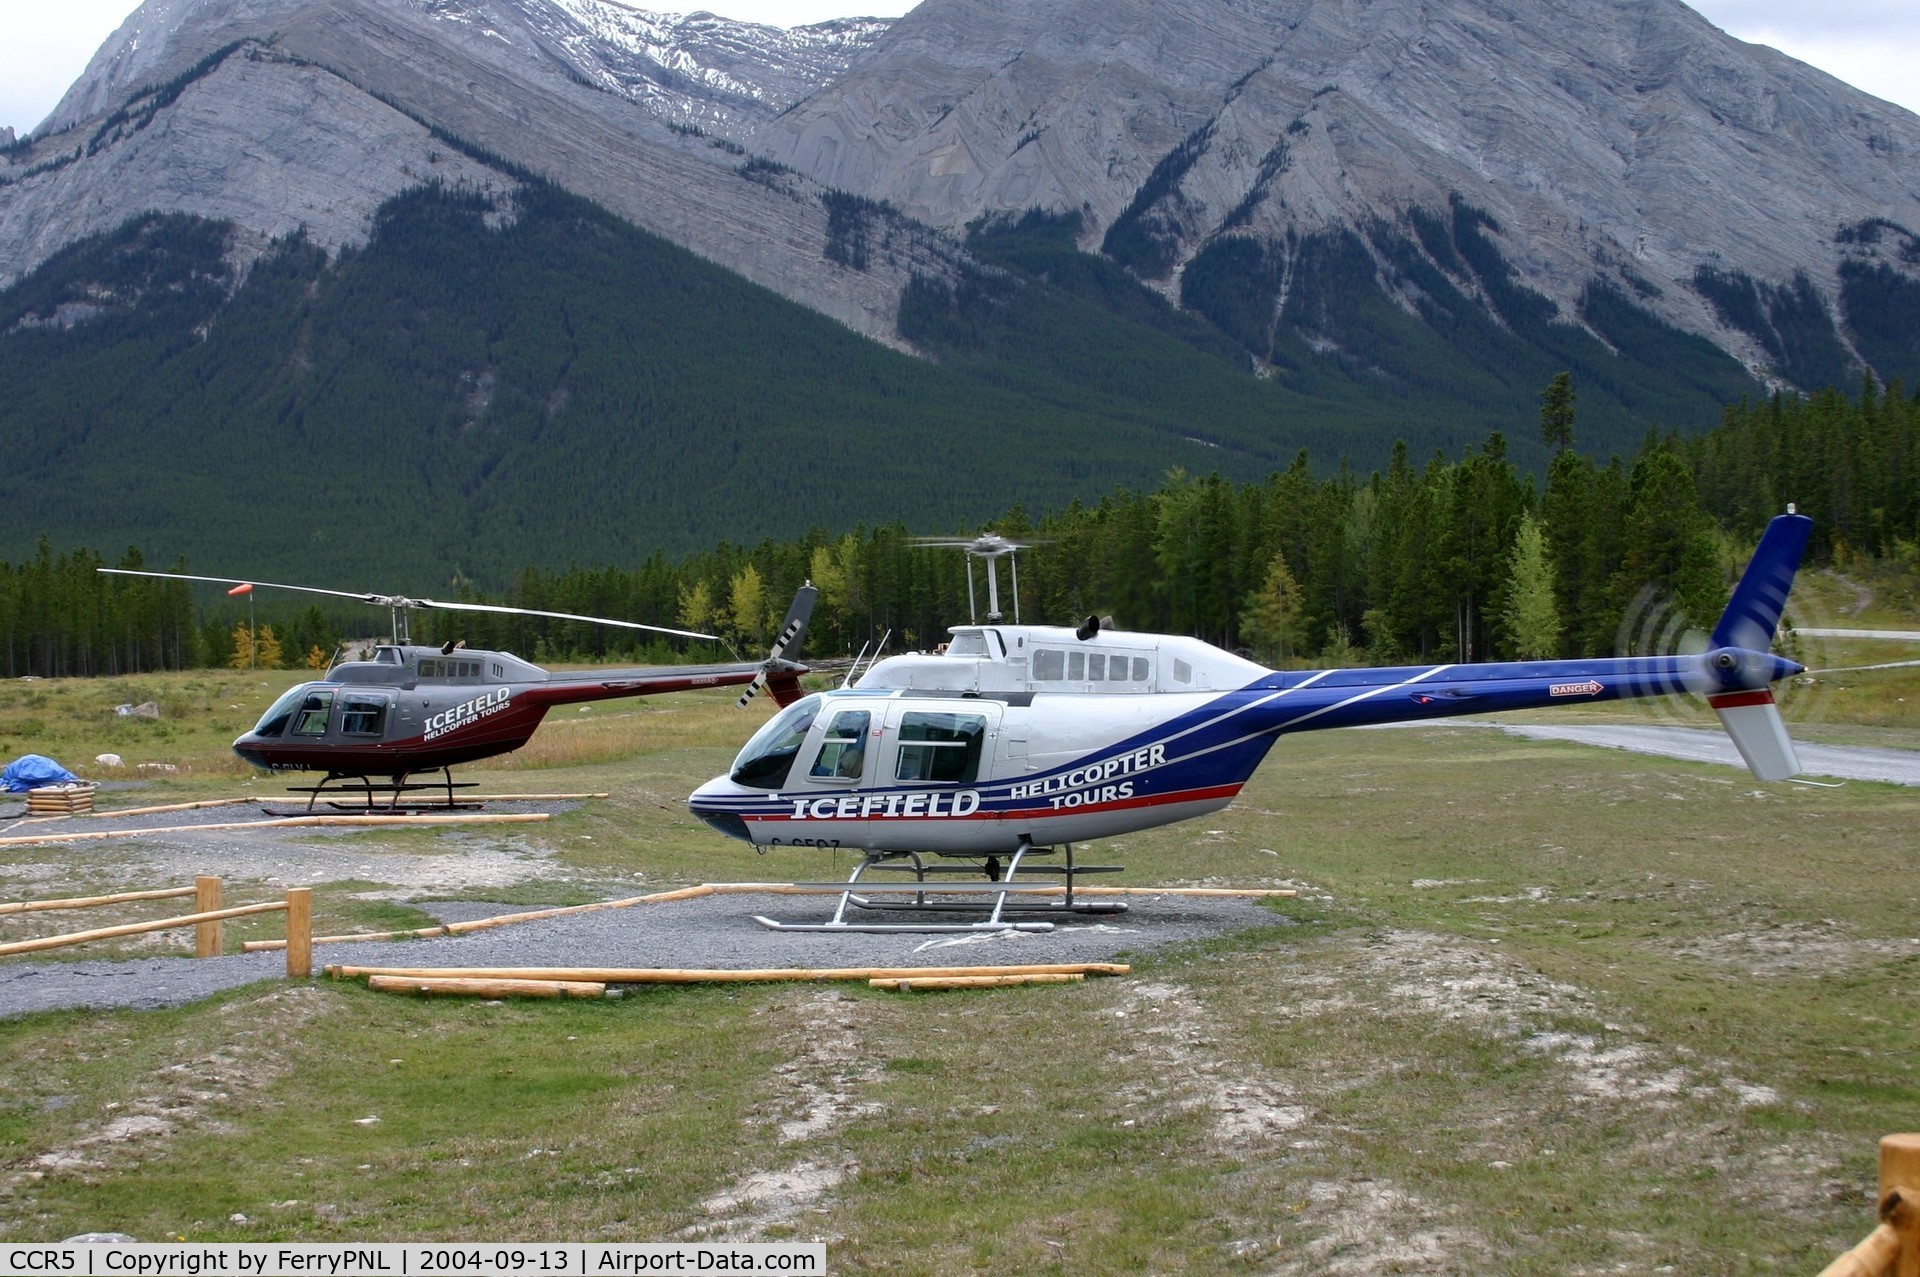 CCR5 Airport - Cline River Heliport, Clearwater County, Alberta, Canada